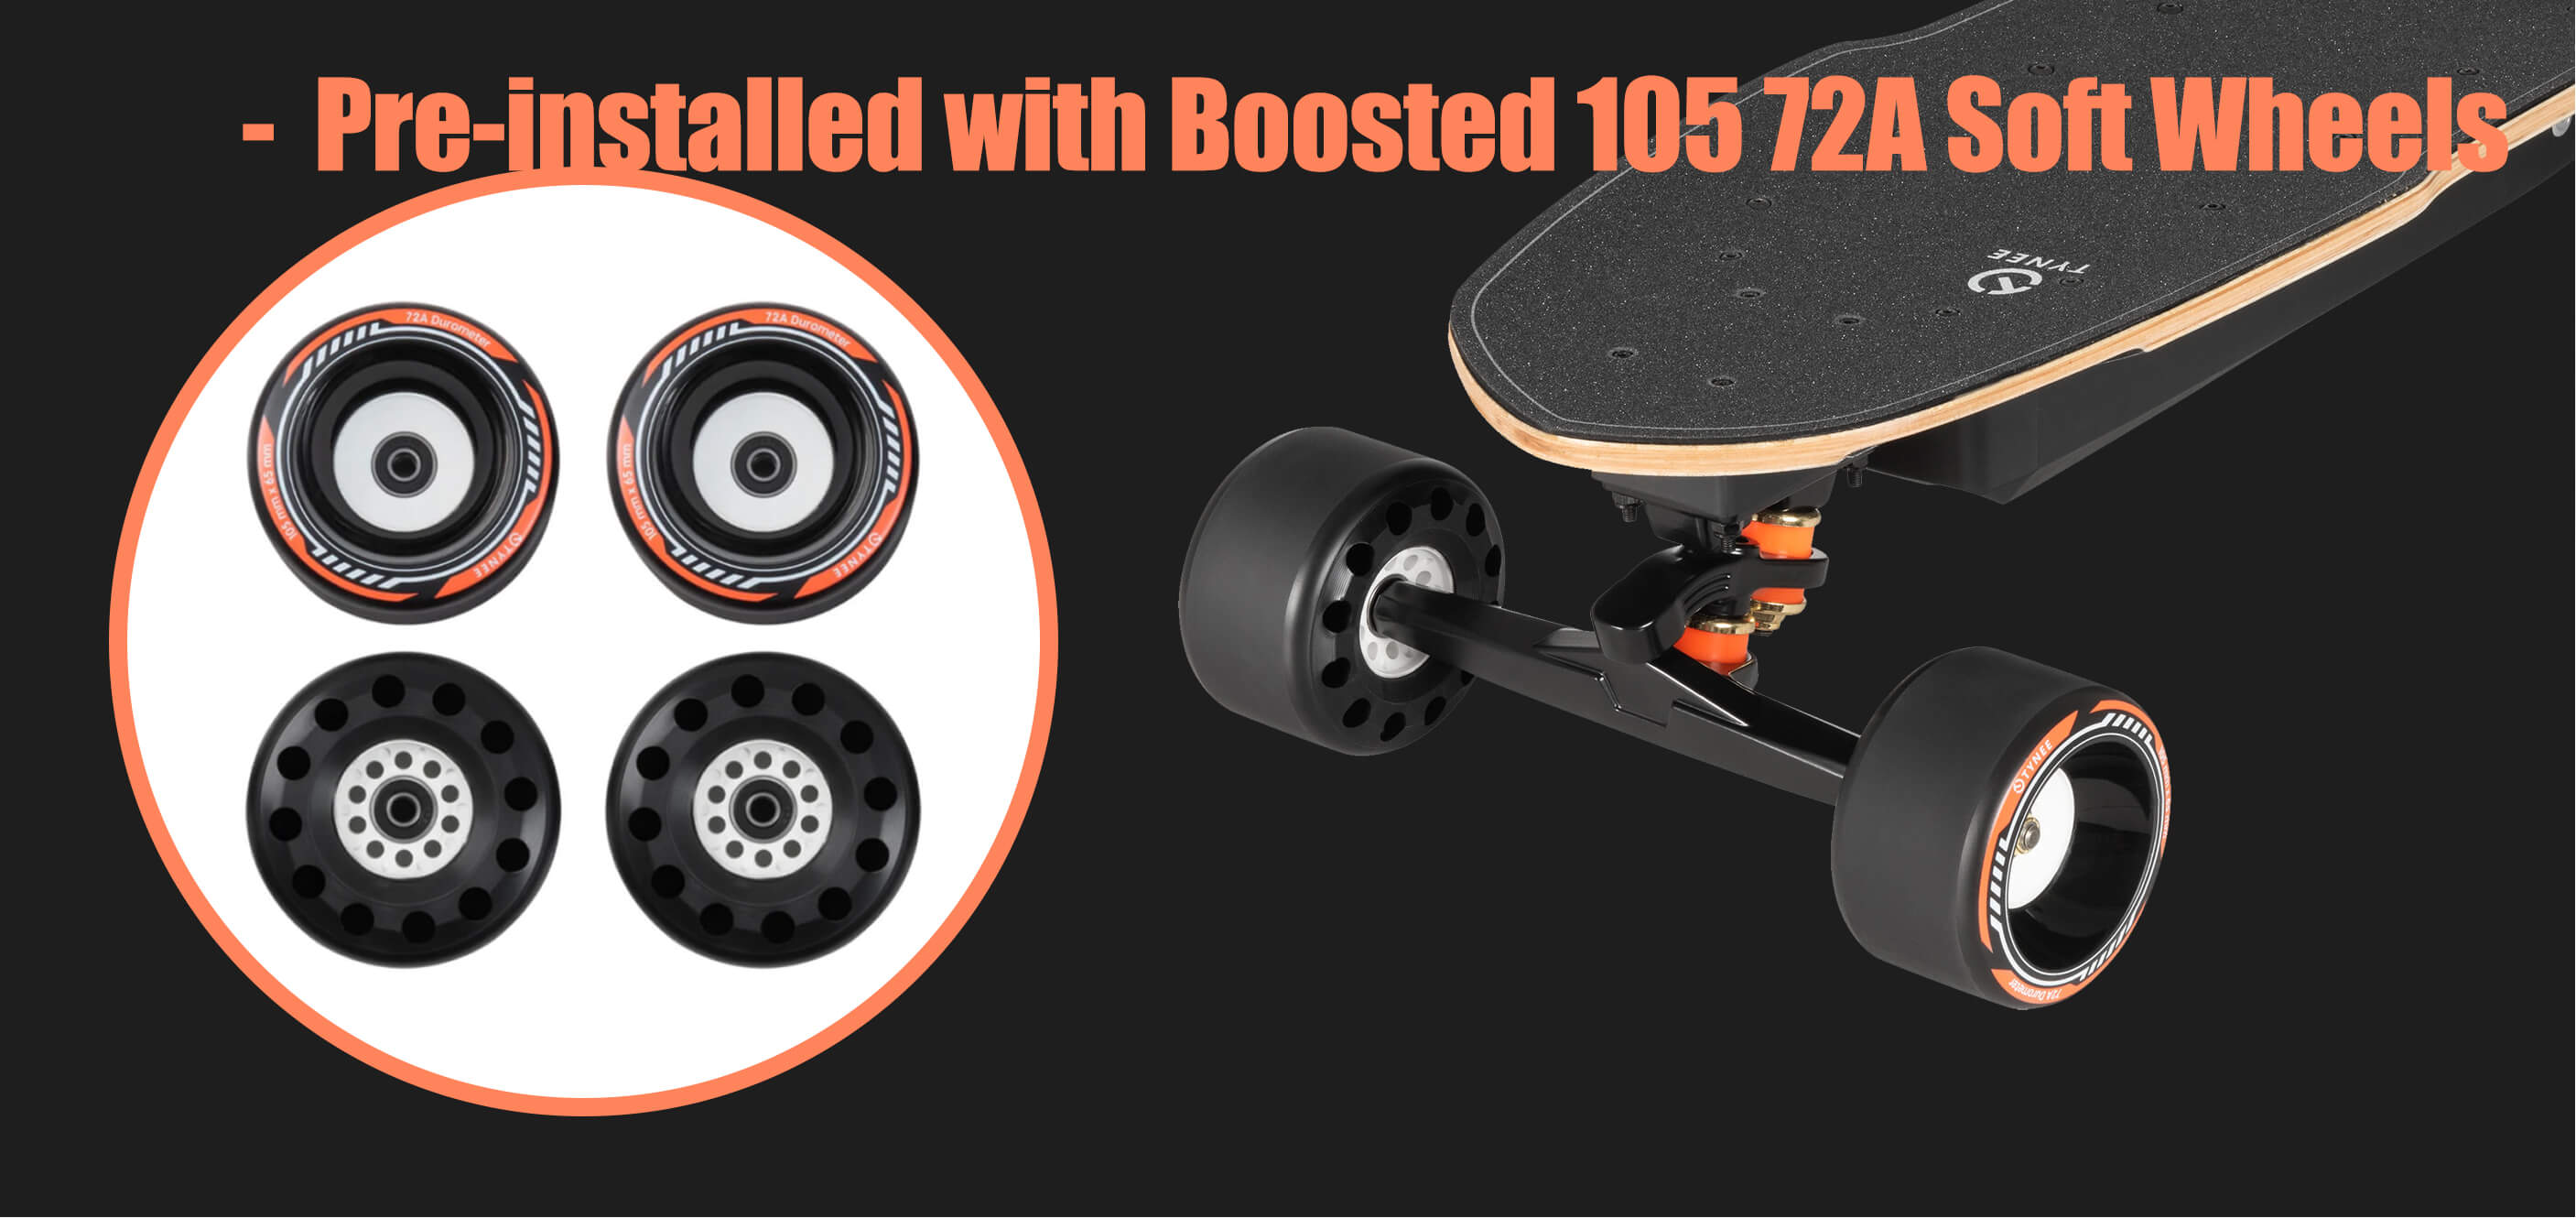 Tynee-stinger-electric-skateboards-with-105-boosted-wheels.jpg__PID:cb74a6cb-74e9-4a2e-8ce7-103e0d8b0c7f